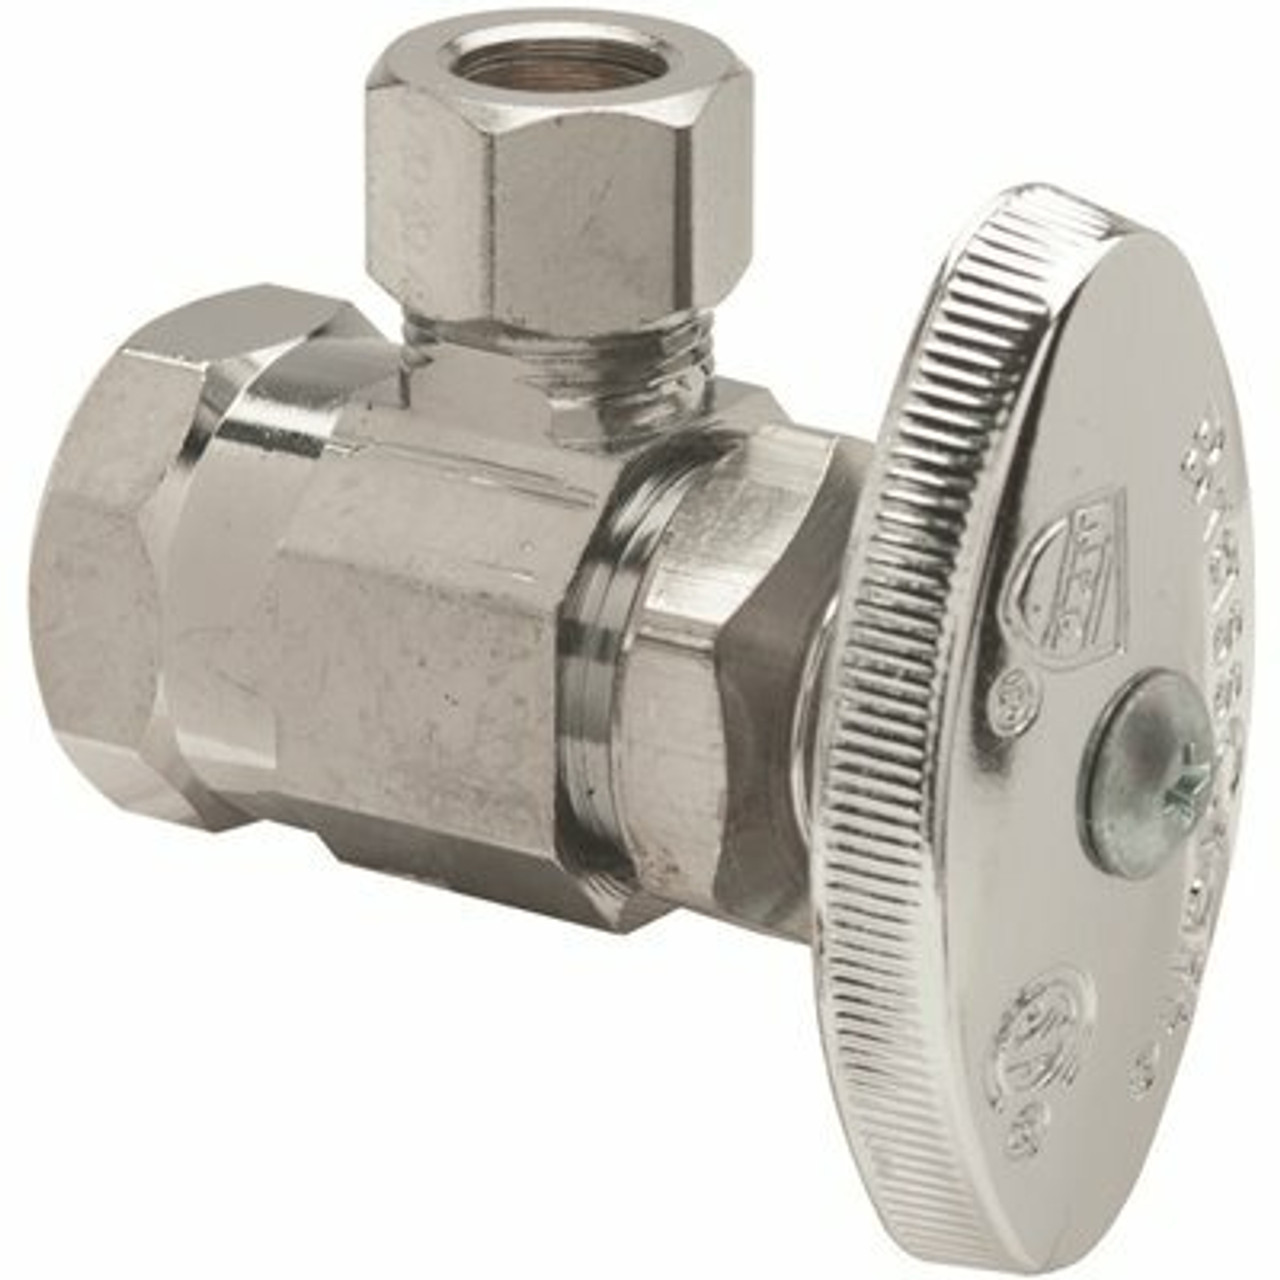 Brasscraft 1/2 In. Fip Inlet X 3/8 In. Od Compression Outlet Multi-Turn Angle Valve With Brass Stem